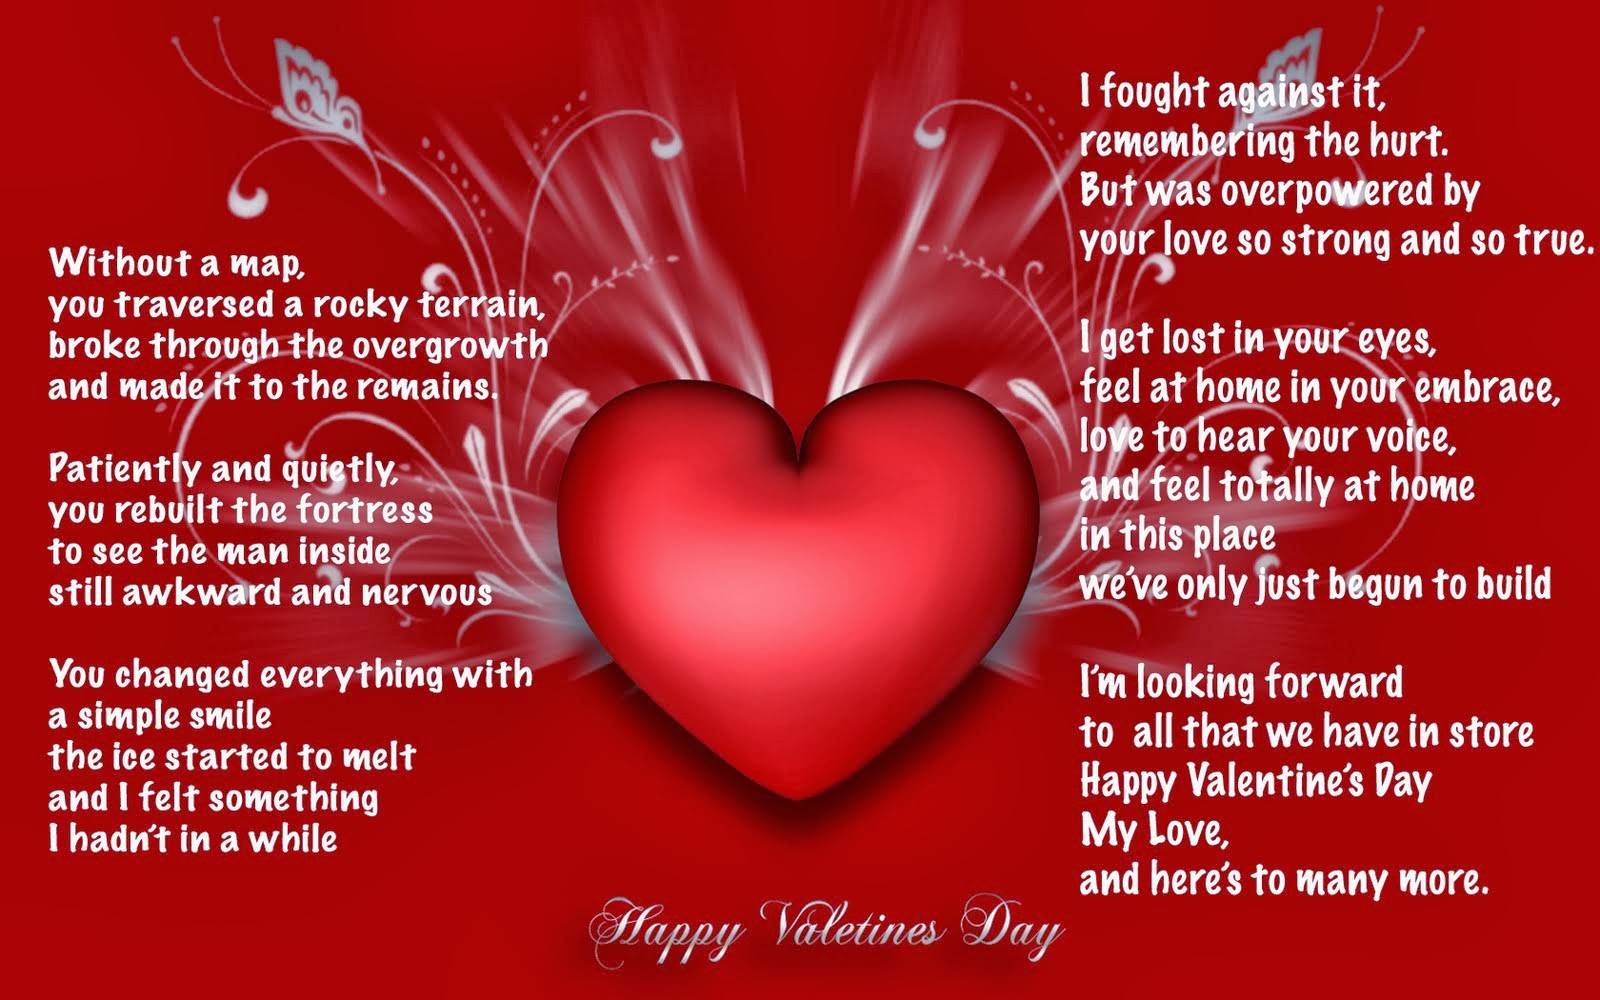 Missing Beats of Life: Happy Valentine's Day (14th February 2014) HD Wallpaper and Image